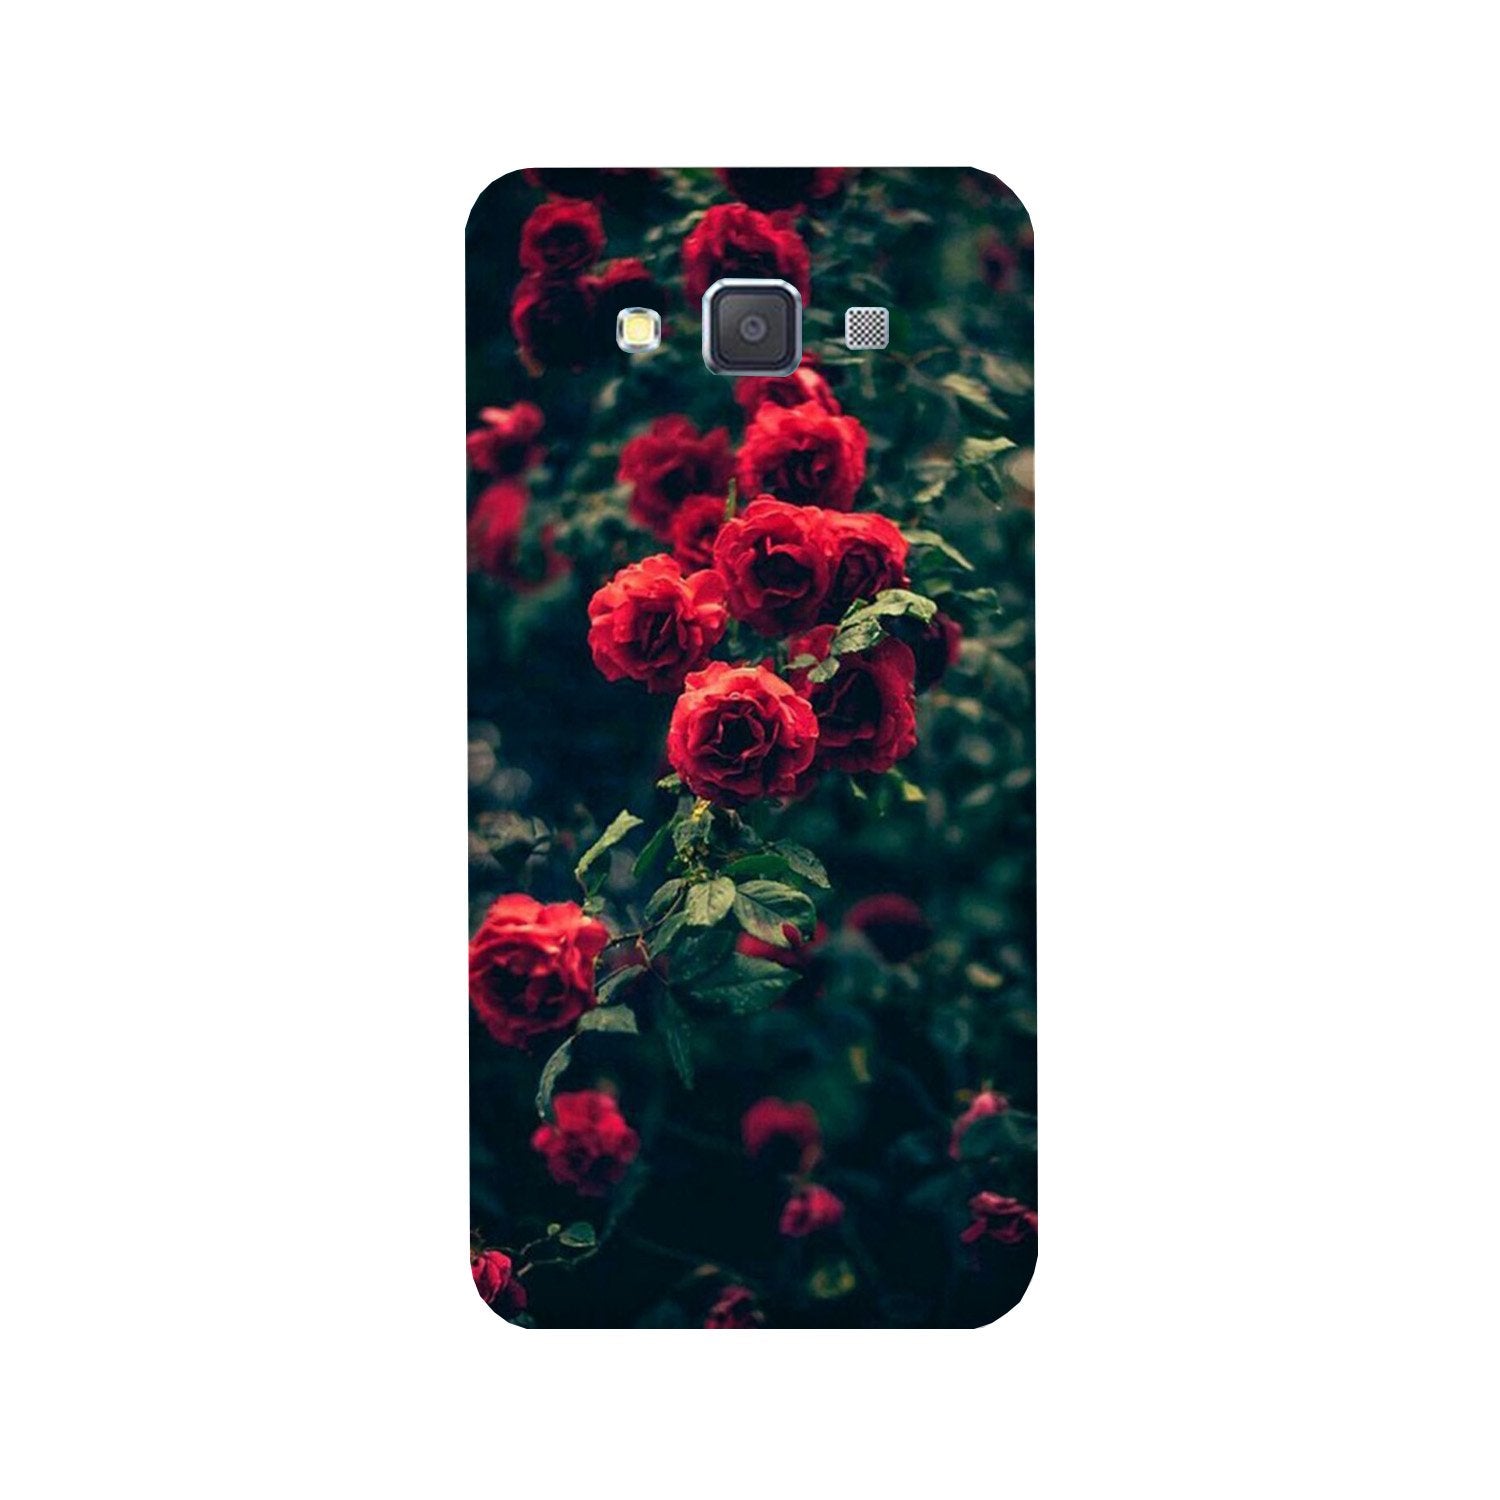 Red Rose Case for Galaxy Grand Max